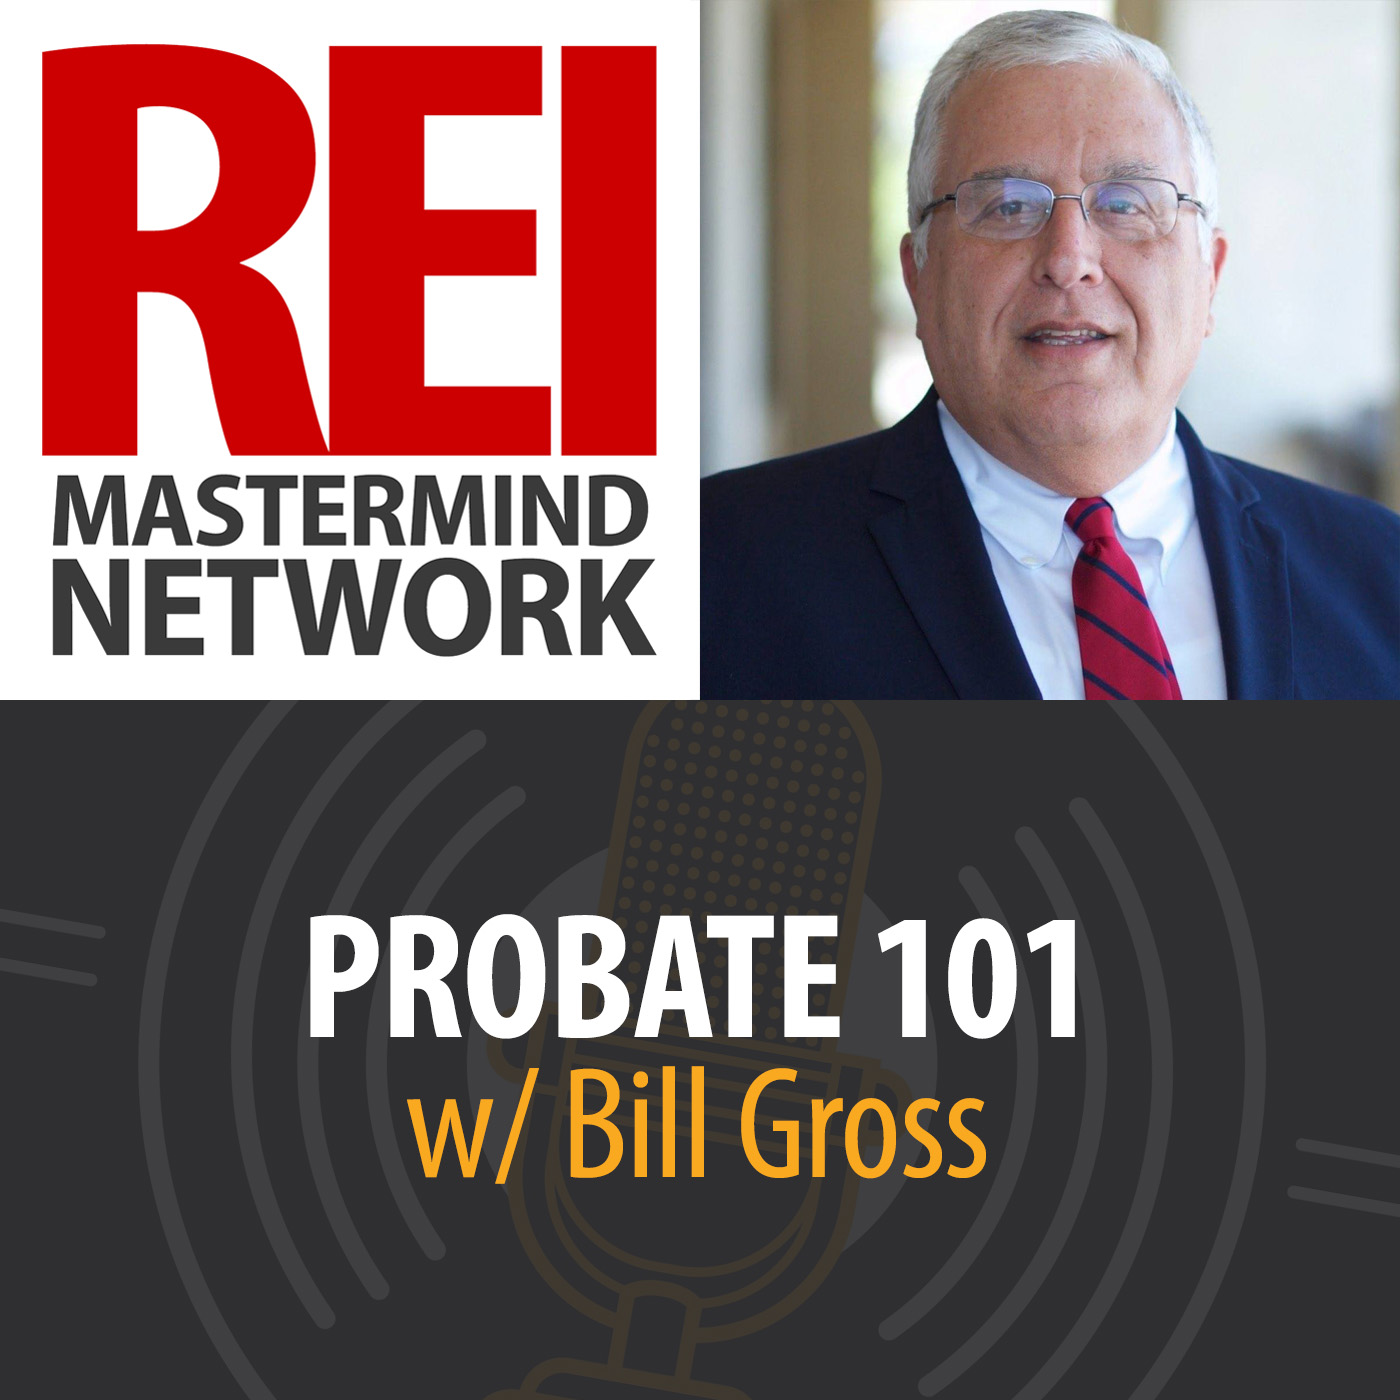 Probate 101 with Bill Gross